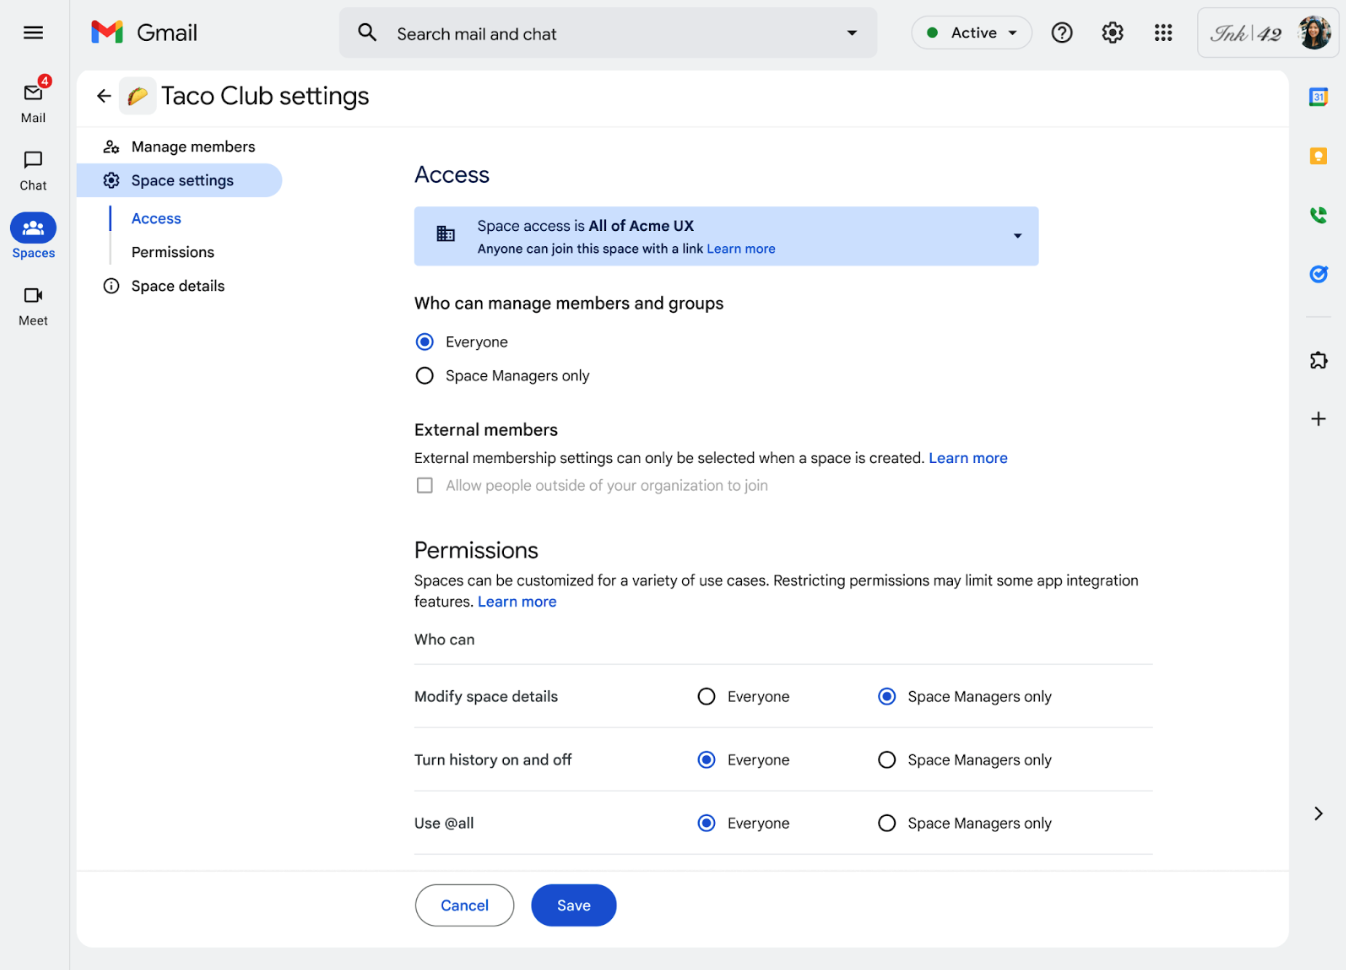 Google Chat adds additional capabilities for space managers